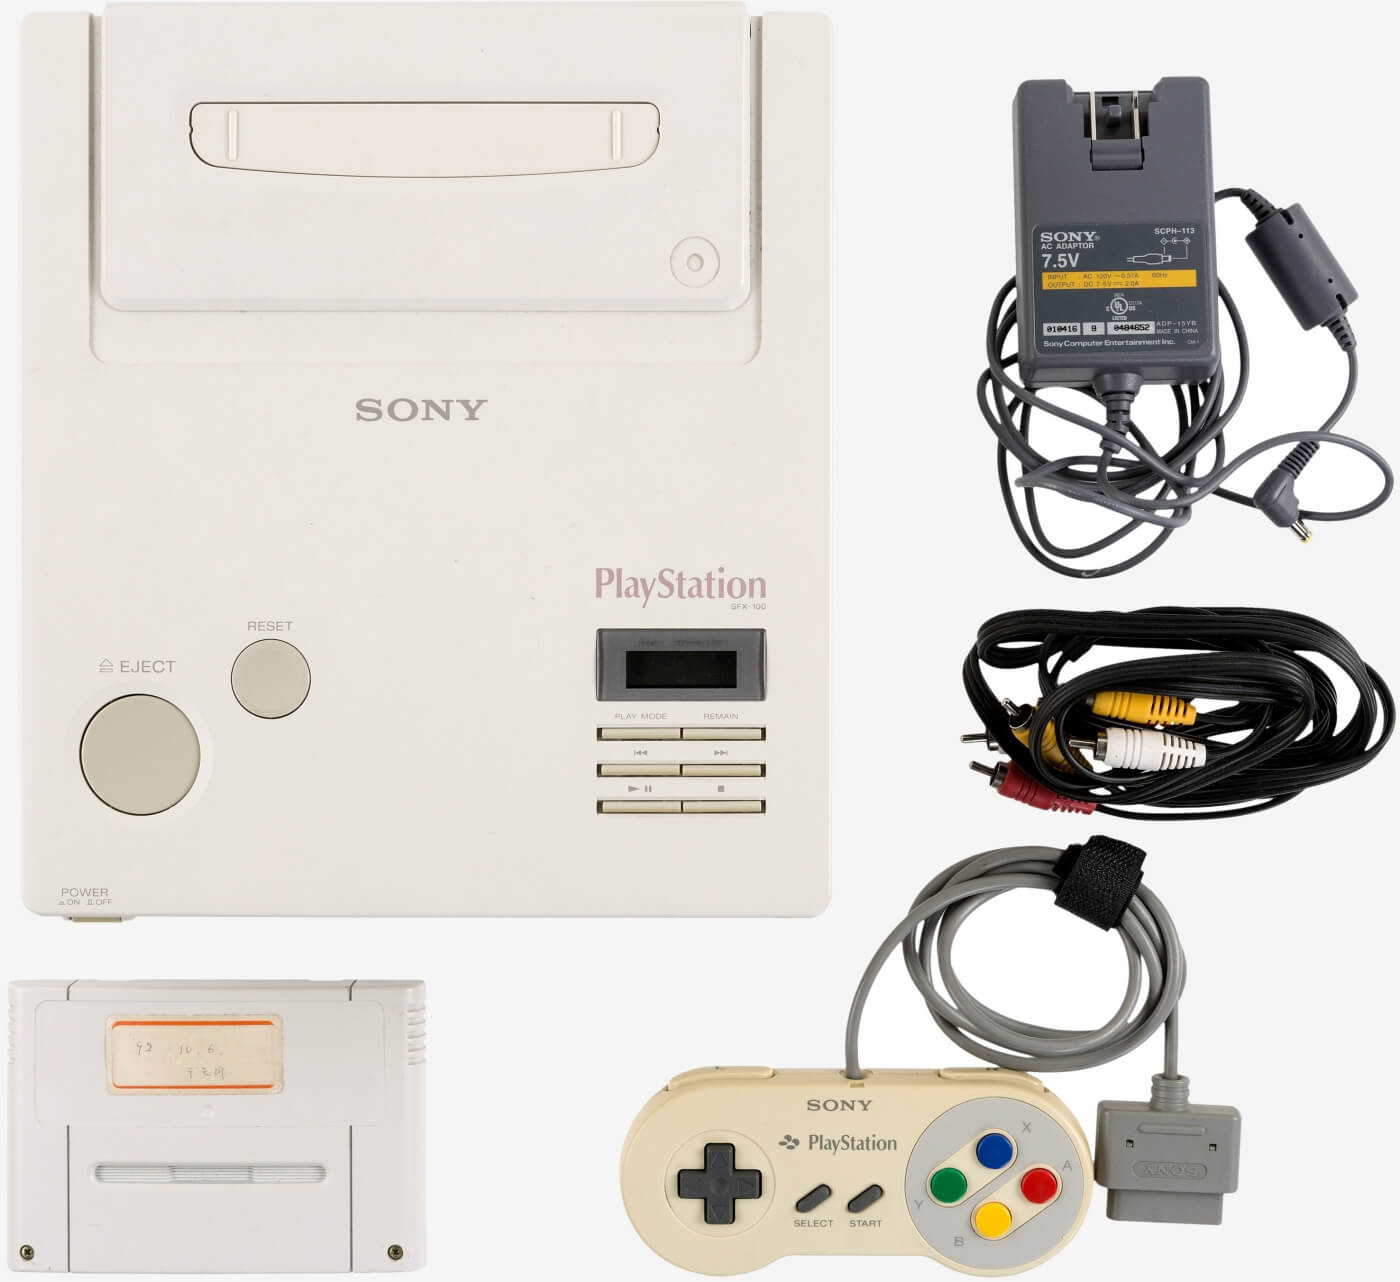 You can now bid on the ultra rare Nintendo PlayStation prototype